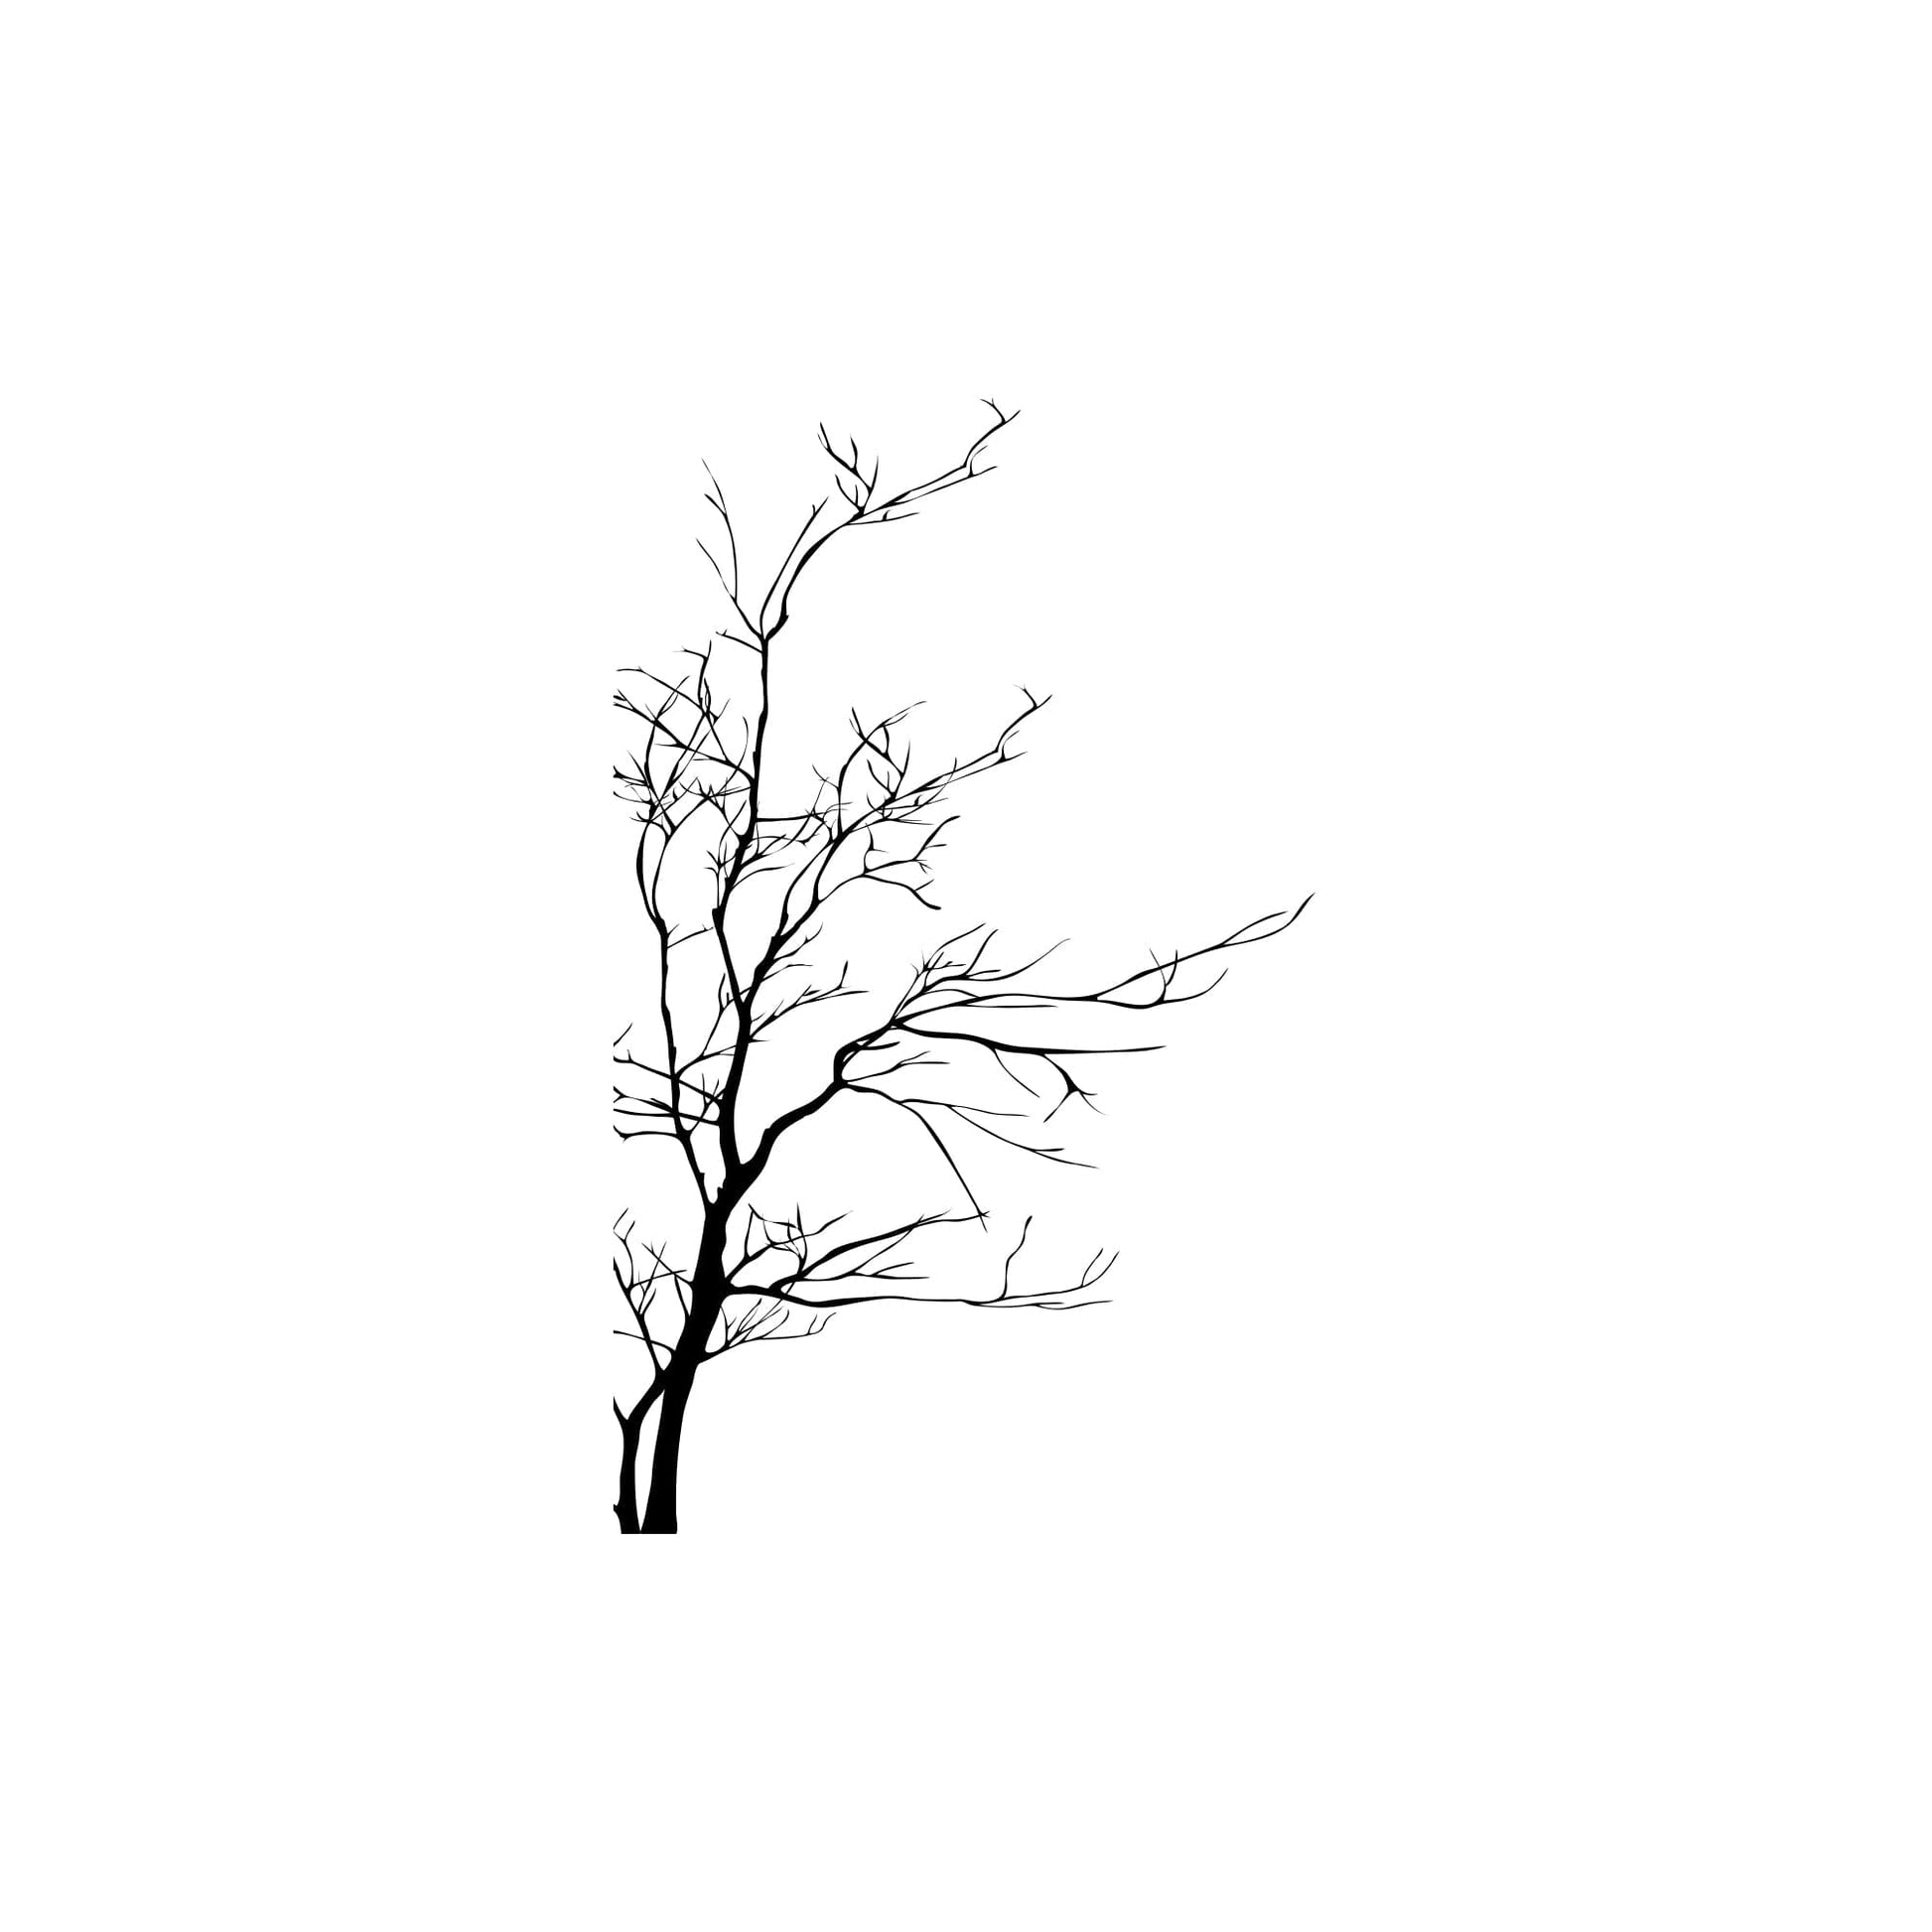 A black tree decal on a white background.